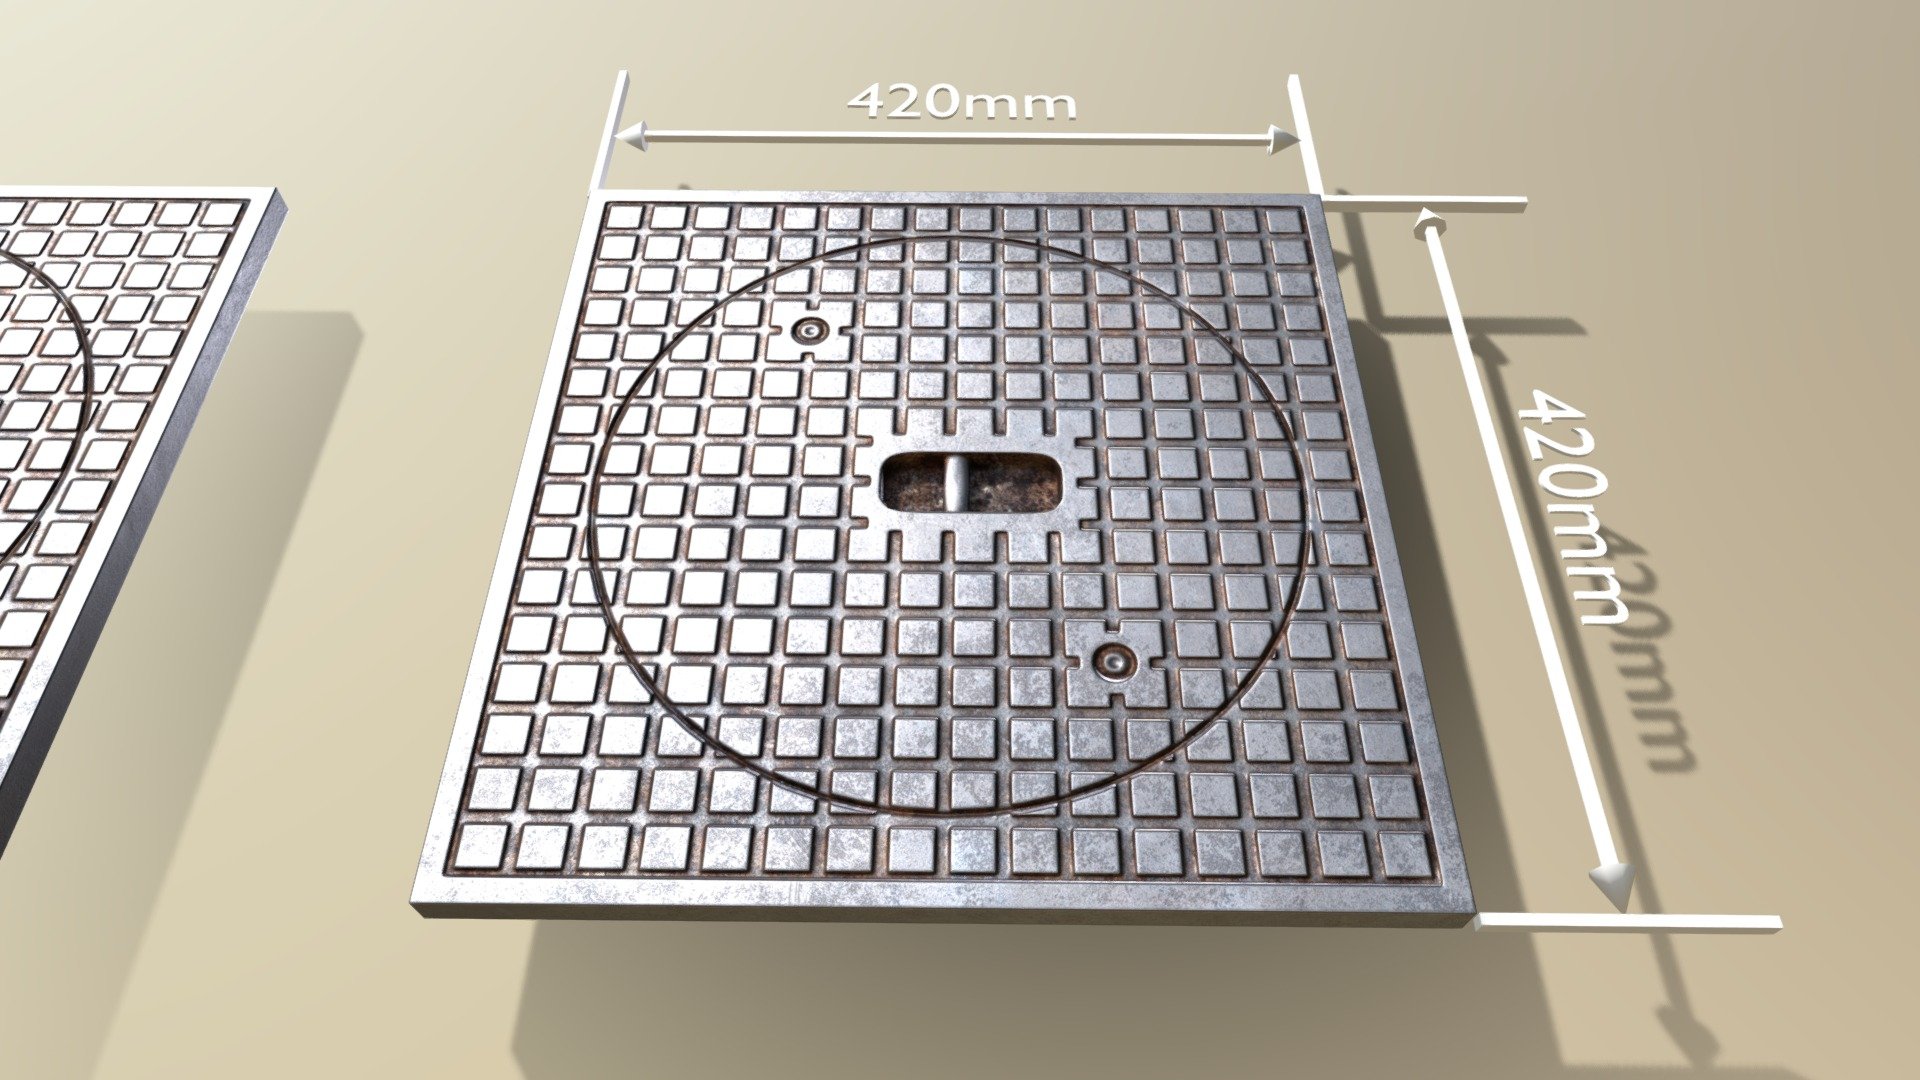 Here is the low-poly version of the sewer cover 5.







PBR-Textures = 4K (PNG)



Parts:




Name - Sewer Cover 5 Low-Poly 


Dimensions -  0.420 x 0.420 x 0.059m




Vertices = 168



Edges = 398

Polygons = 230






Name - Sewer Cover 5 Low-Poly_Simple 


Dimensions -  0.420 x 0.420m x 0.018m




Vertices = 120



Edges = 278

Polygons = 157



3D model formats: 




Native format (*.blend)

Autodesk FBX (.fbx)

OBJ (.obj, .mtl)

glTF (.gltf, .glb)

X3D (.x3d)

Collada (.dae)

Stereolithography (.stl)

Polygon File Format (.ply)

Alembic (.abc)

DXF (.dxf)



 - Sewer Cover 5 Low-Poly Version - Buy Royalty Free 3D model by VIS-All-3D (@VIS-All) 3d model